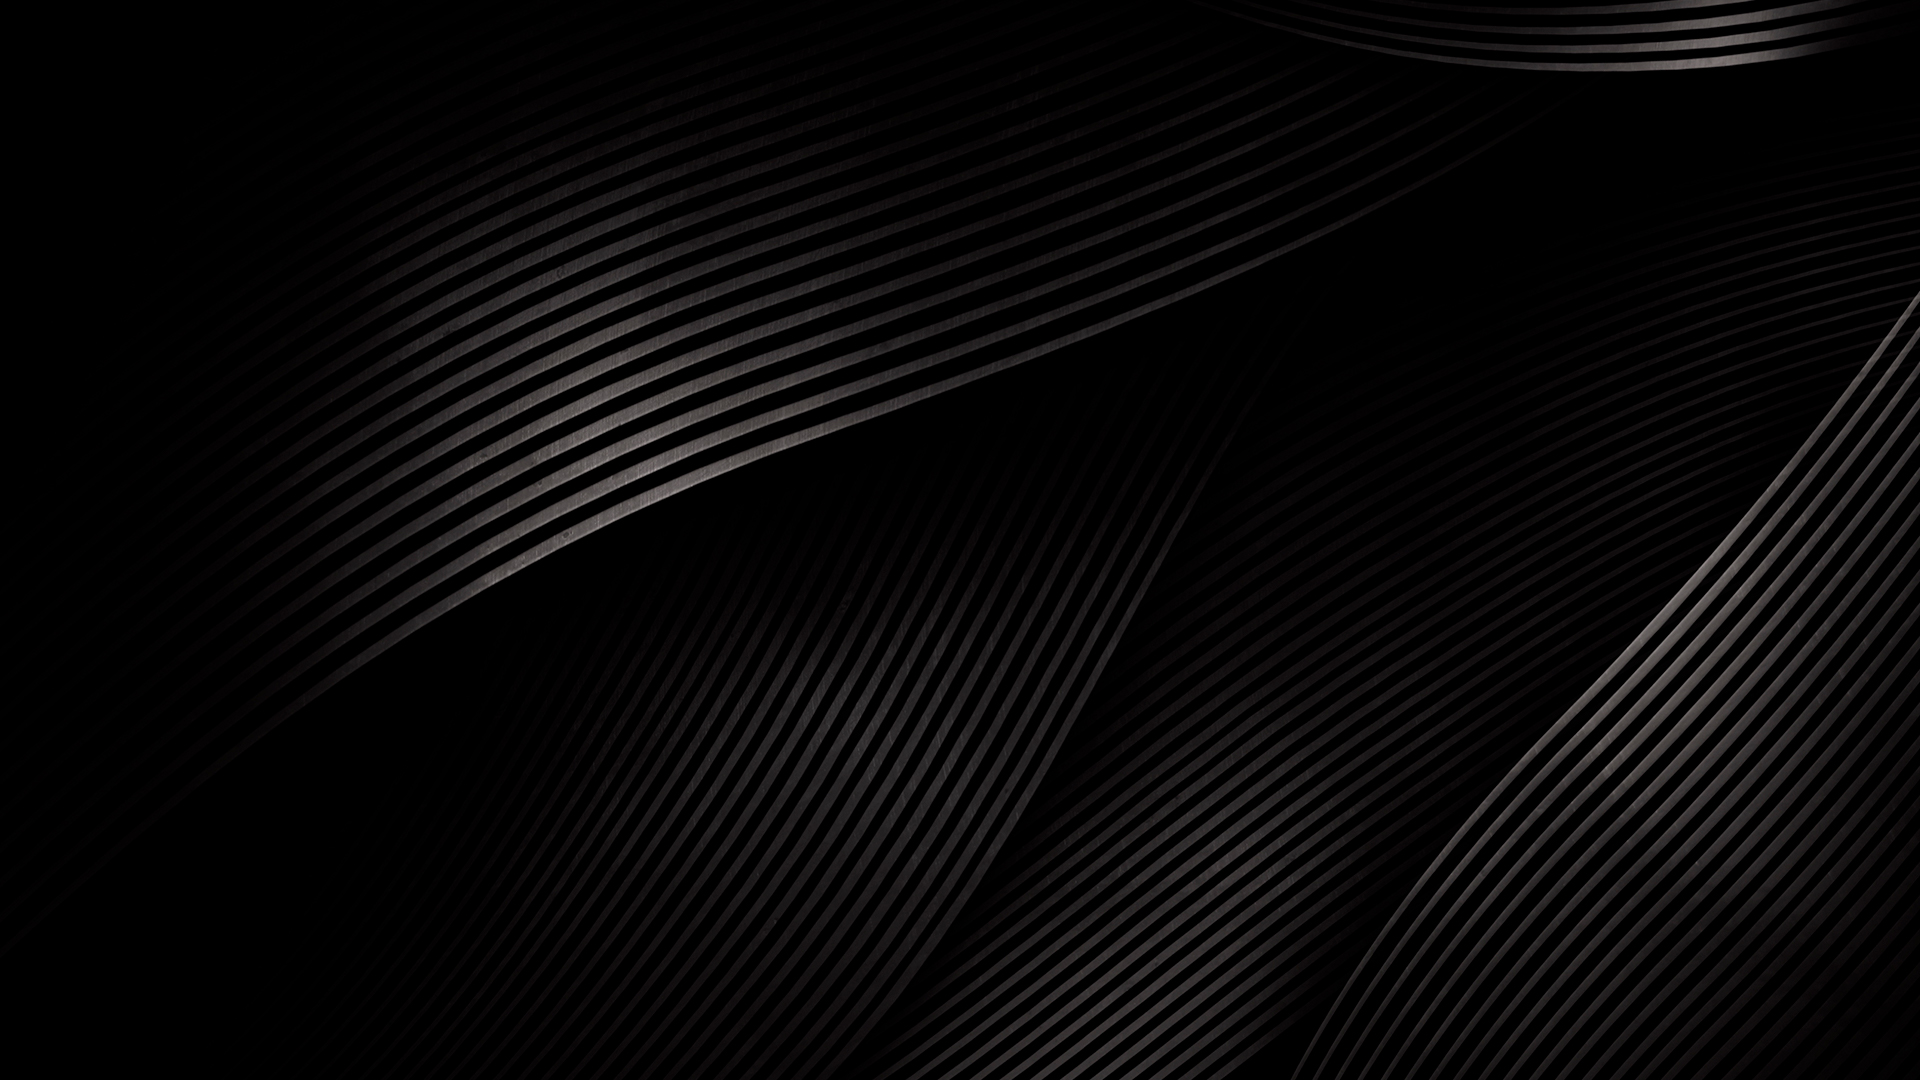 Black Waves Abstract Hd Background Themes10win